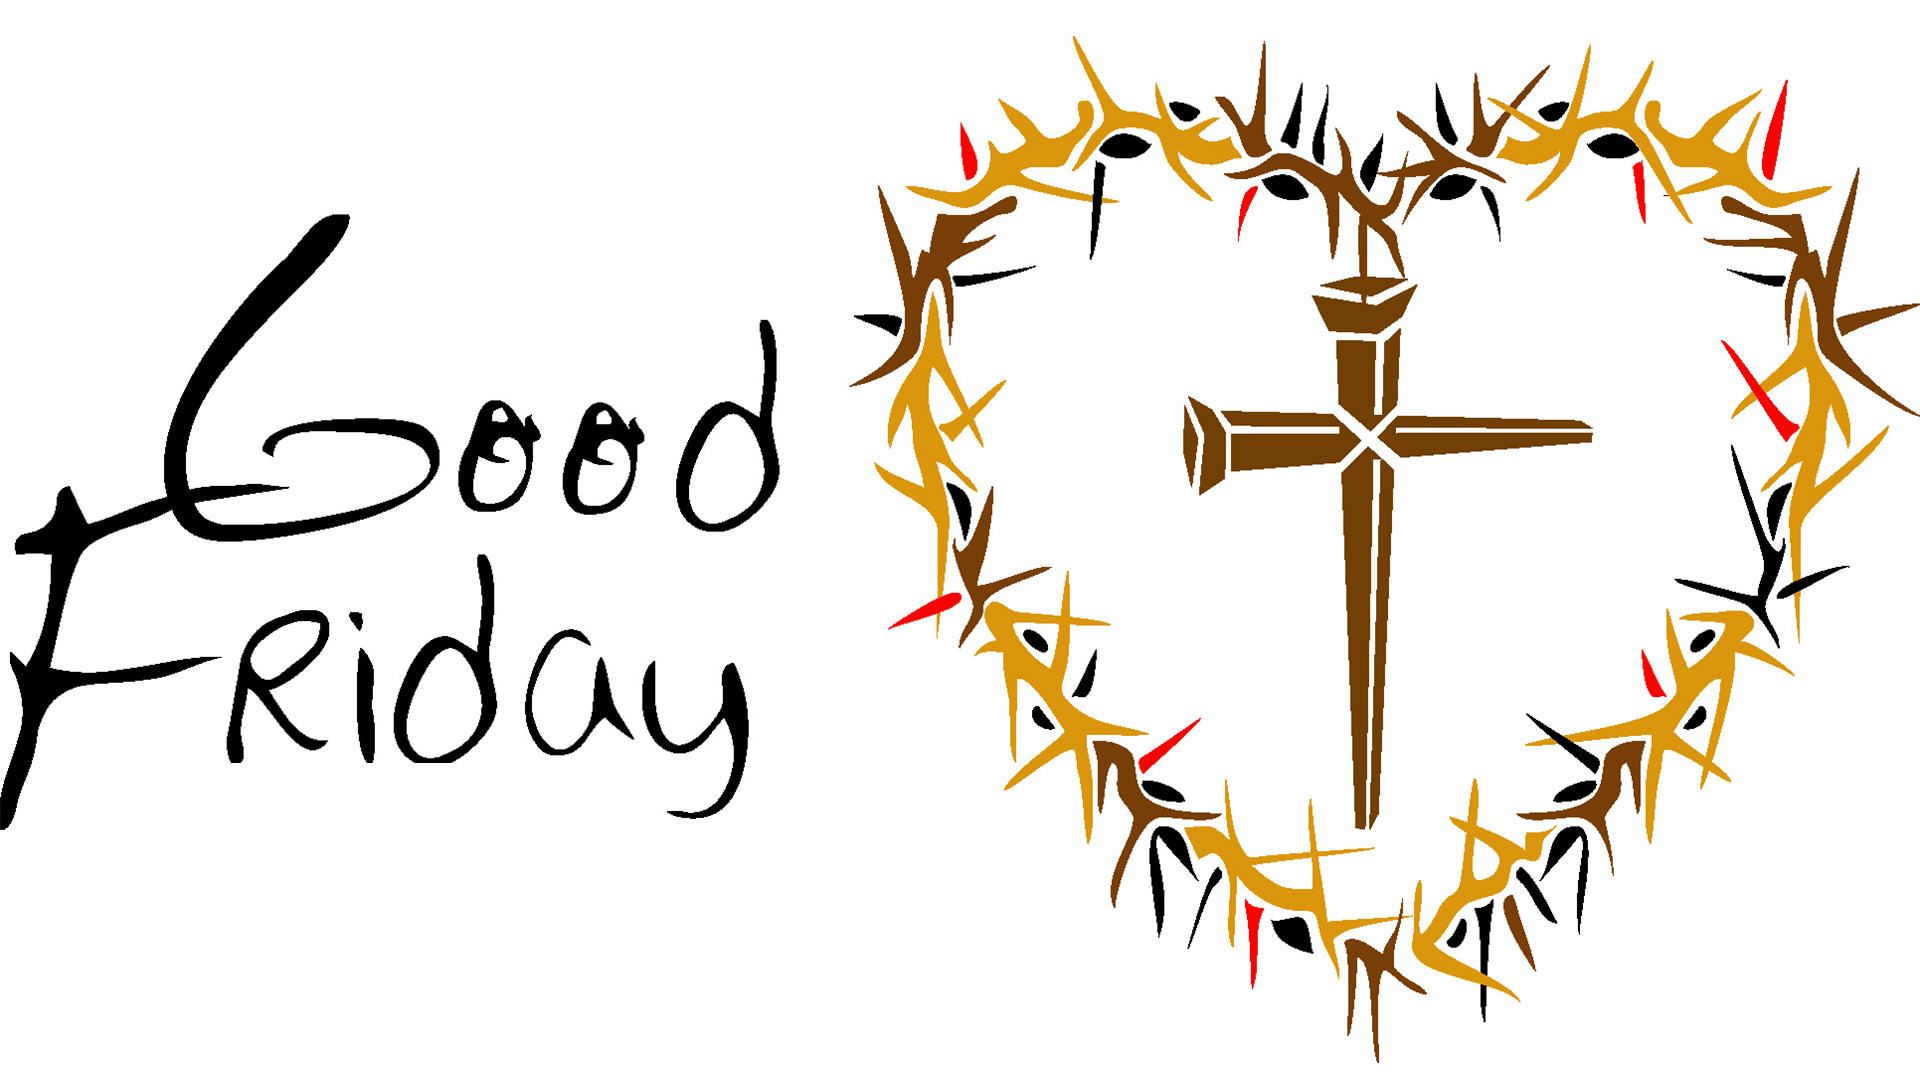 Why is it called Good Friday of Good Friday